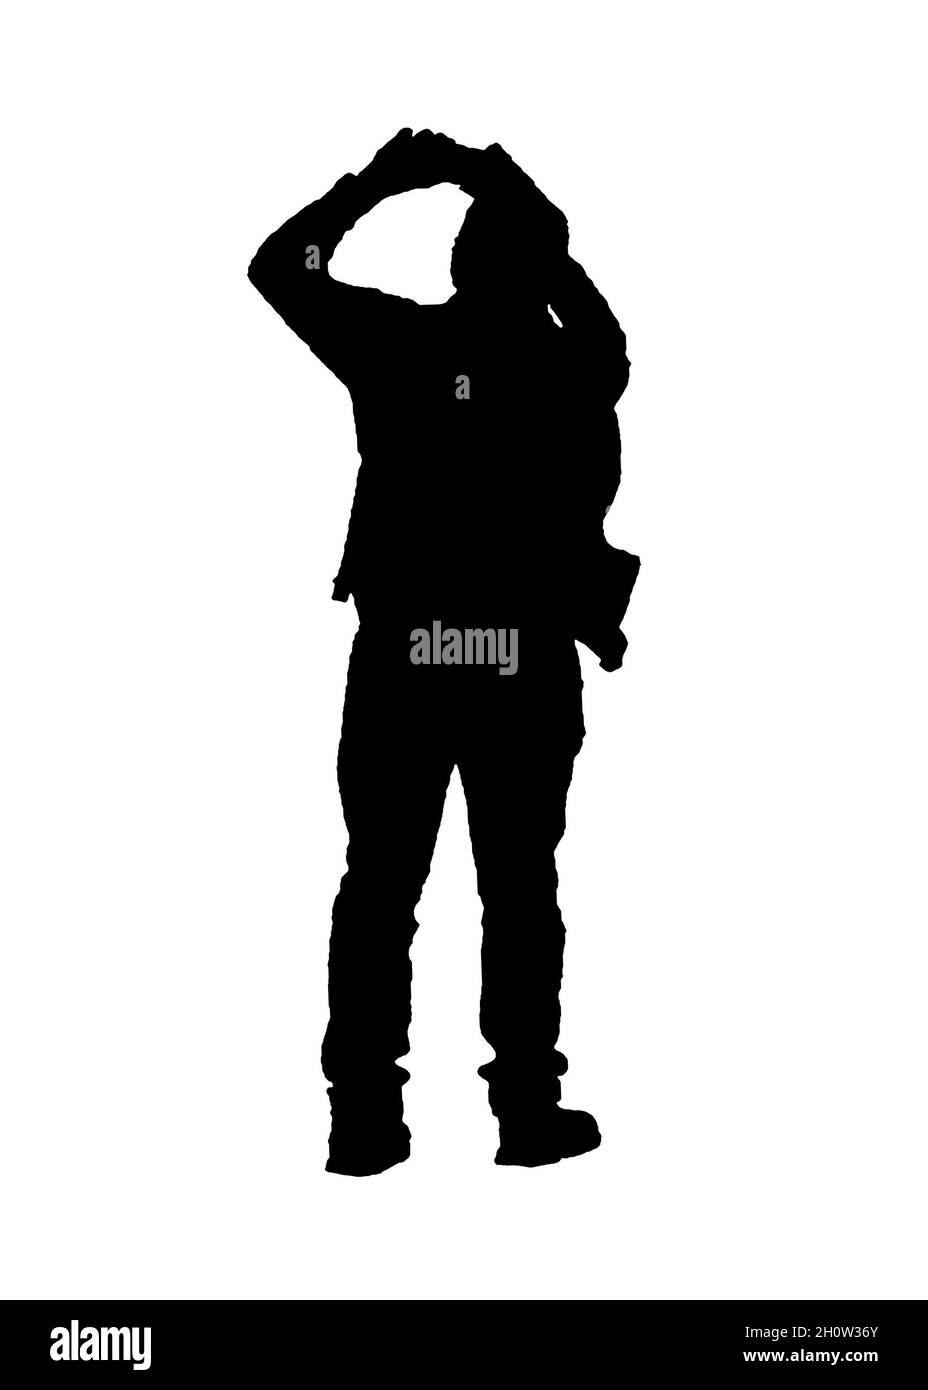 Man taking photos with mobile phone back view isolated graphic Stock Photo